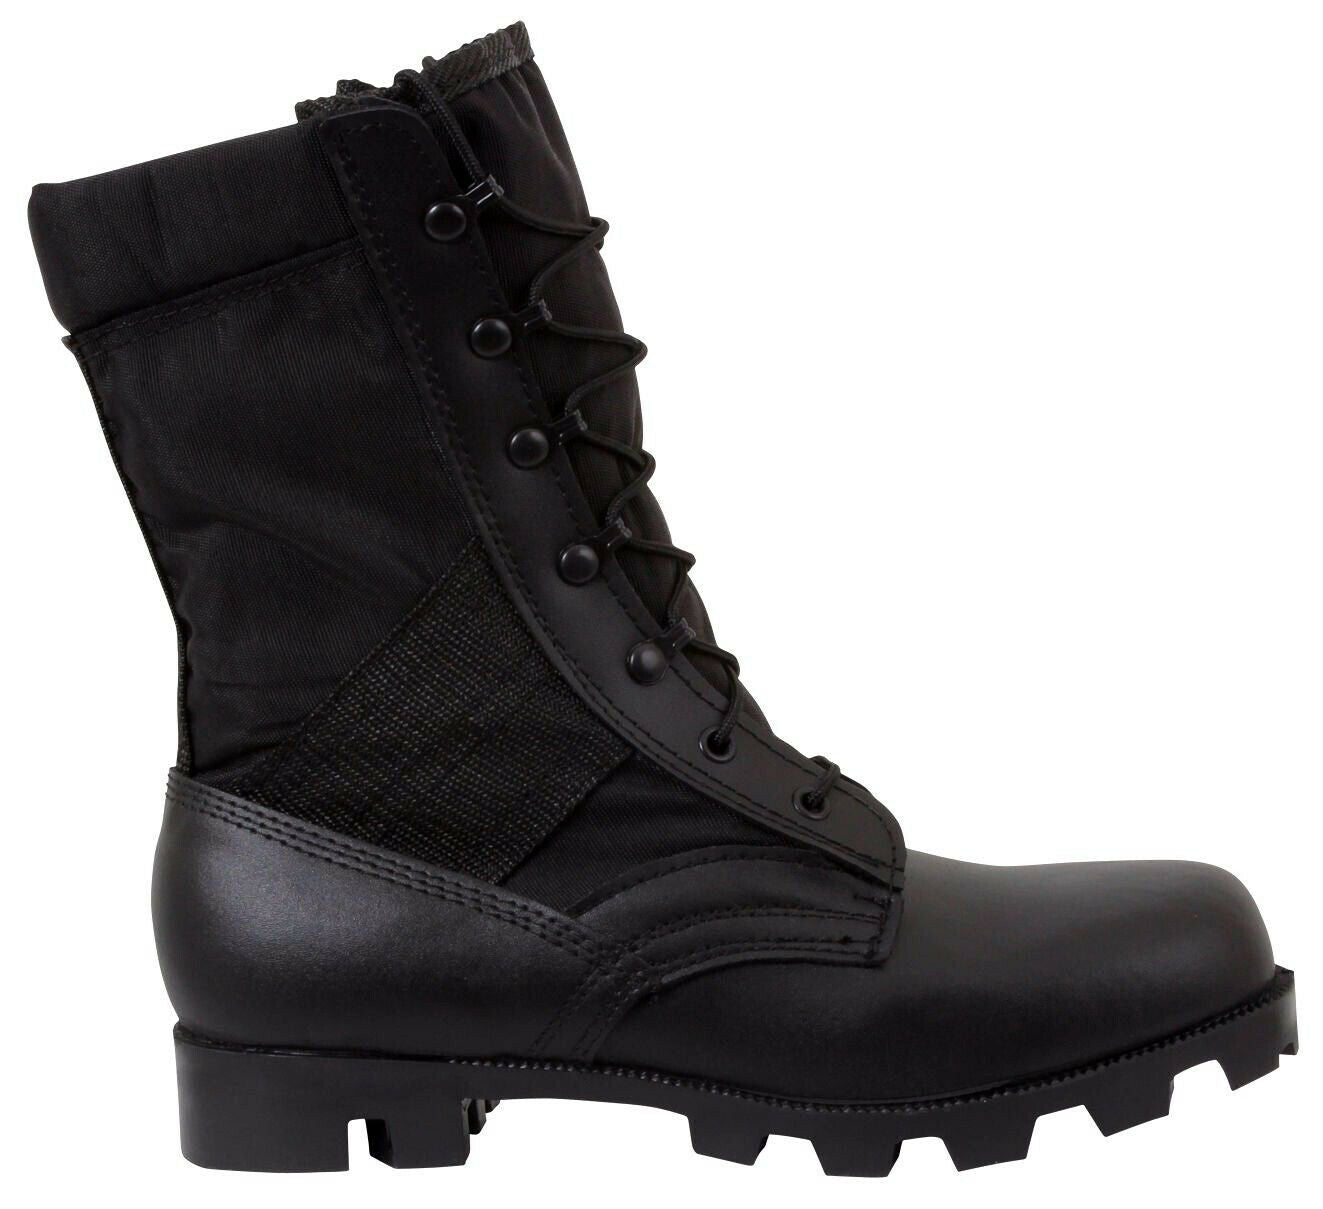 Rothco Black G.I. Type Speedlace Jungle Boots - 9 Inch